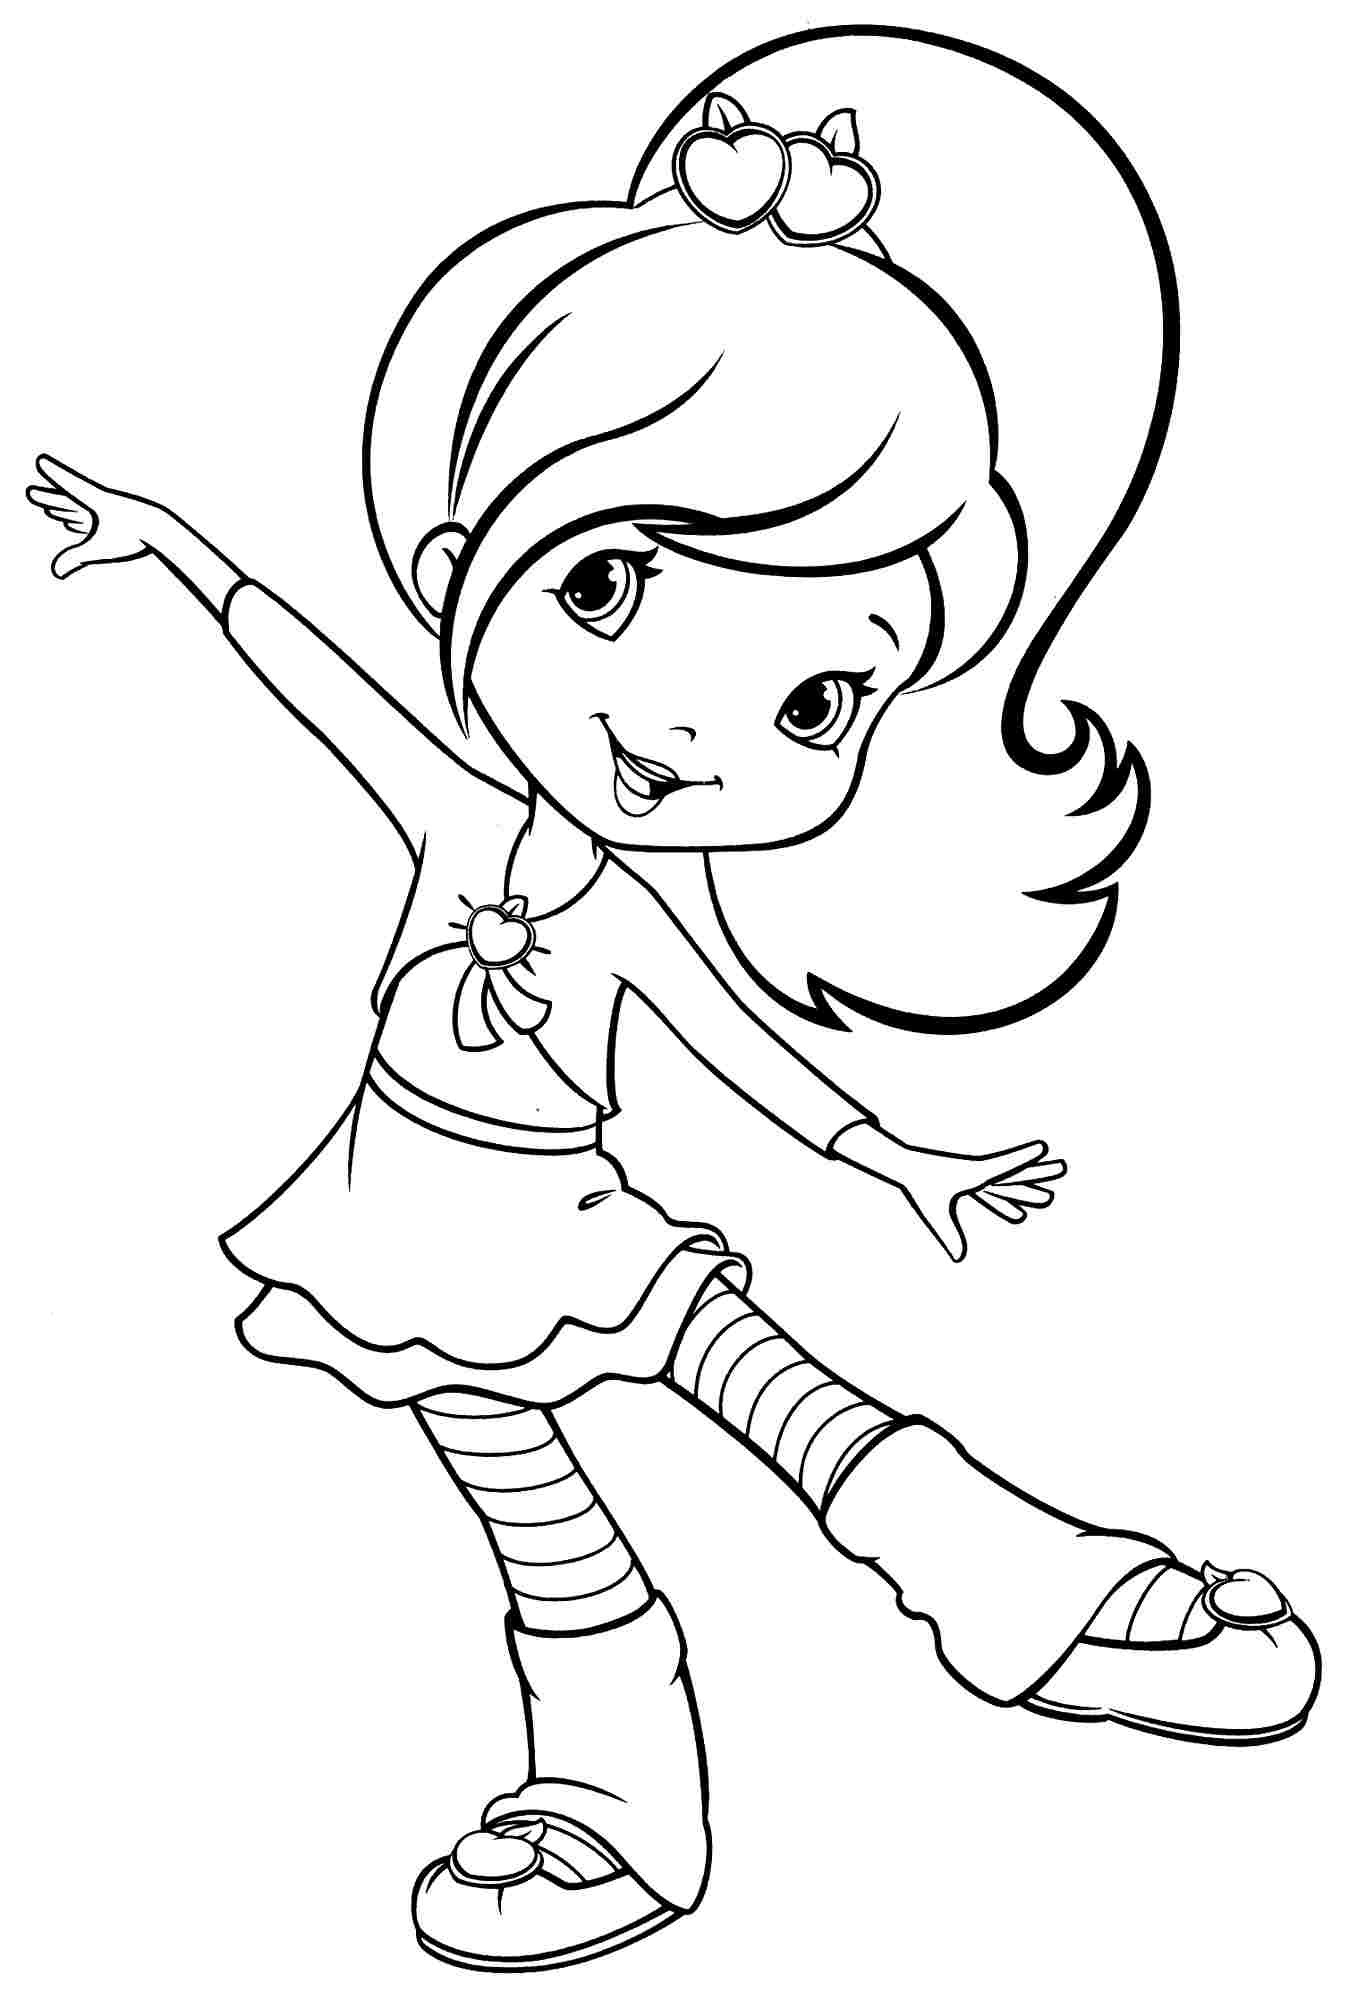 Fun Coloring Pages For Girls
 Coloring Pages for Girls Best Coloring Pages For Kids